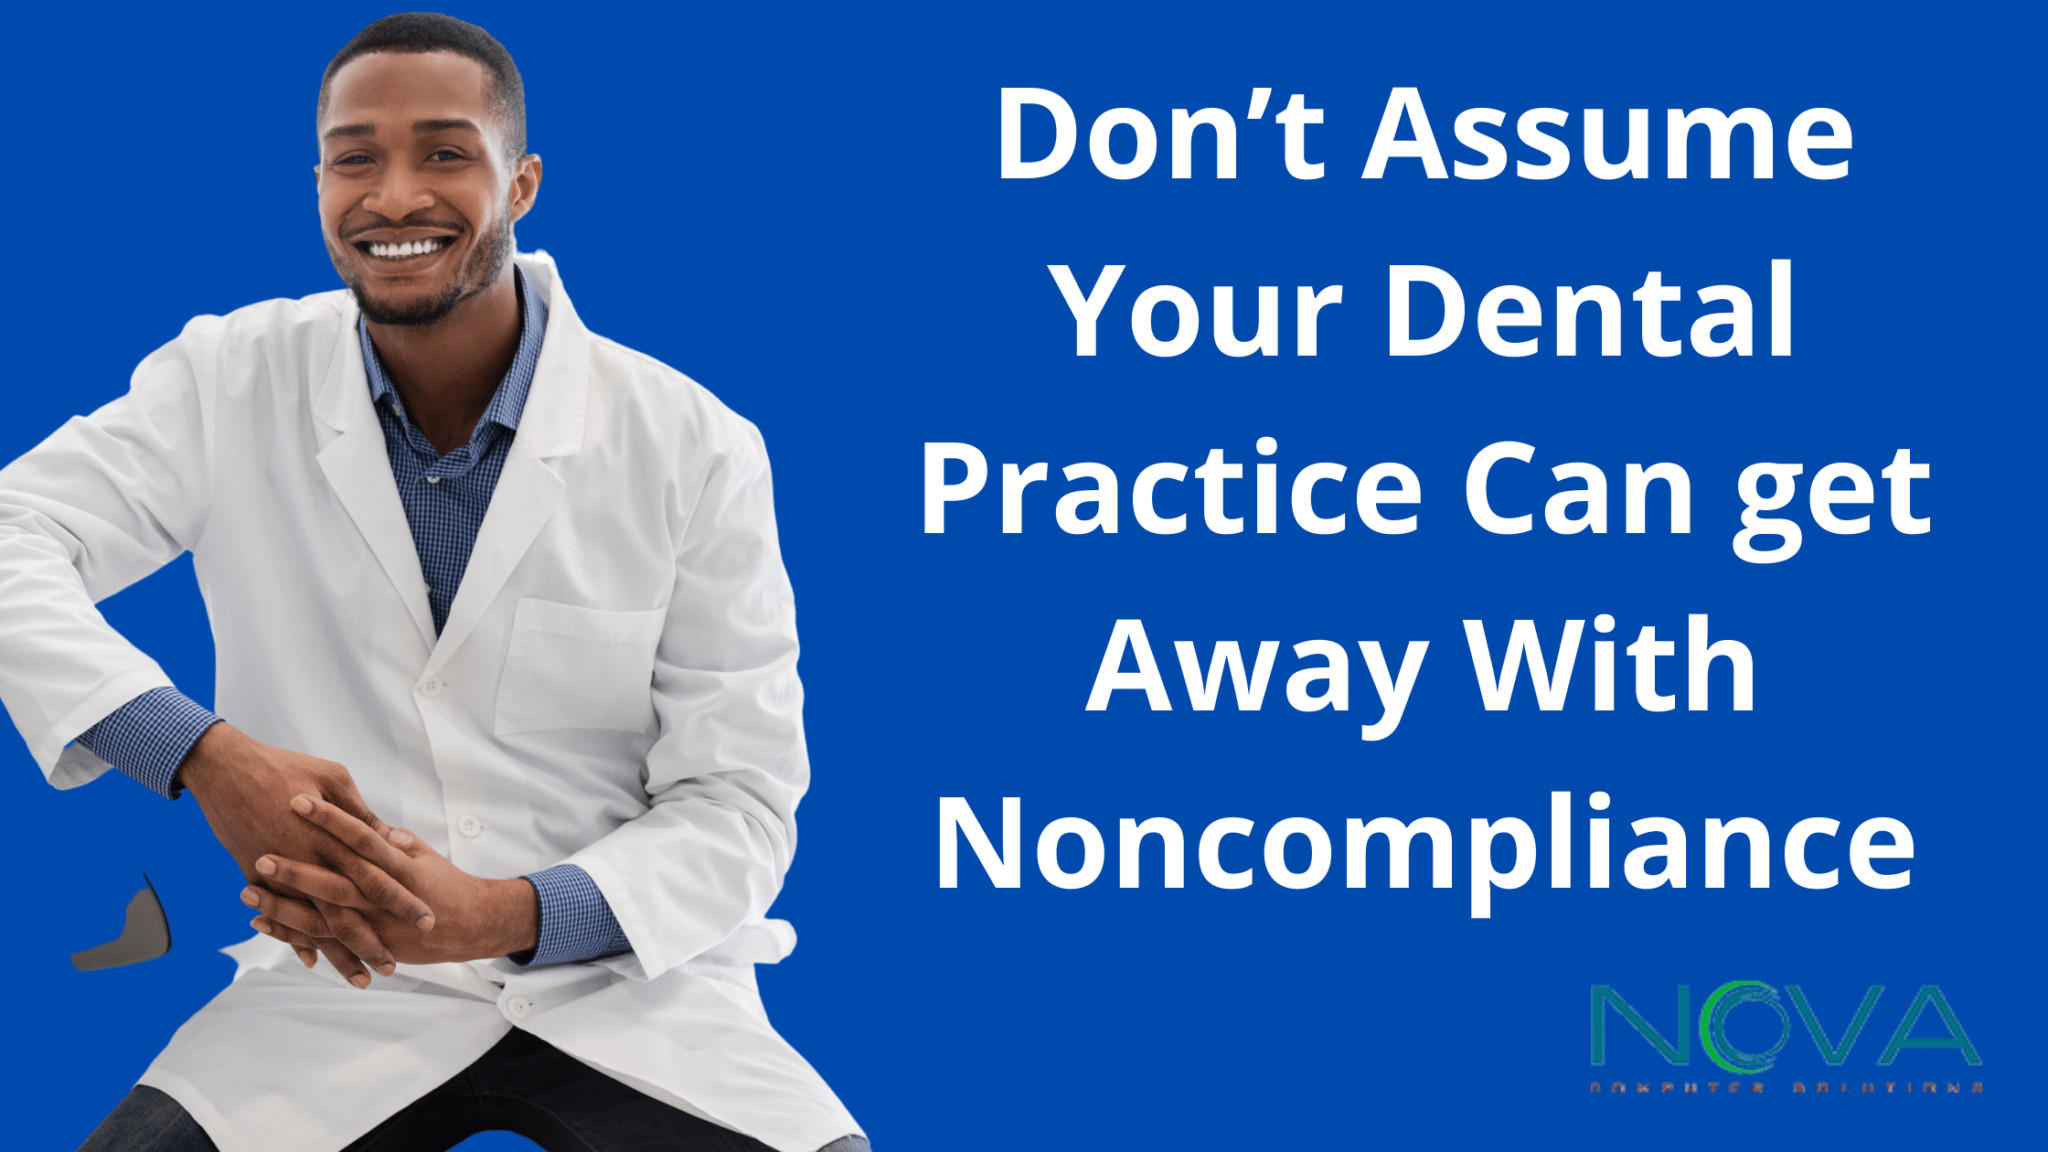 Don’t Assume Your Dental Practice Can get Away With Noncompliance